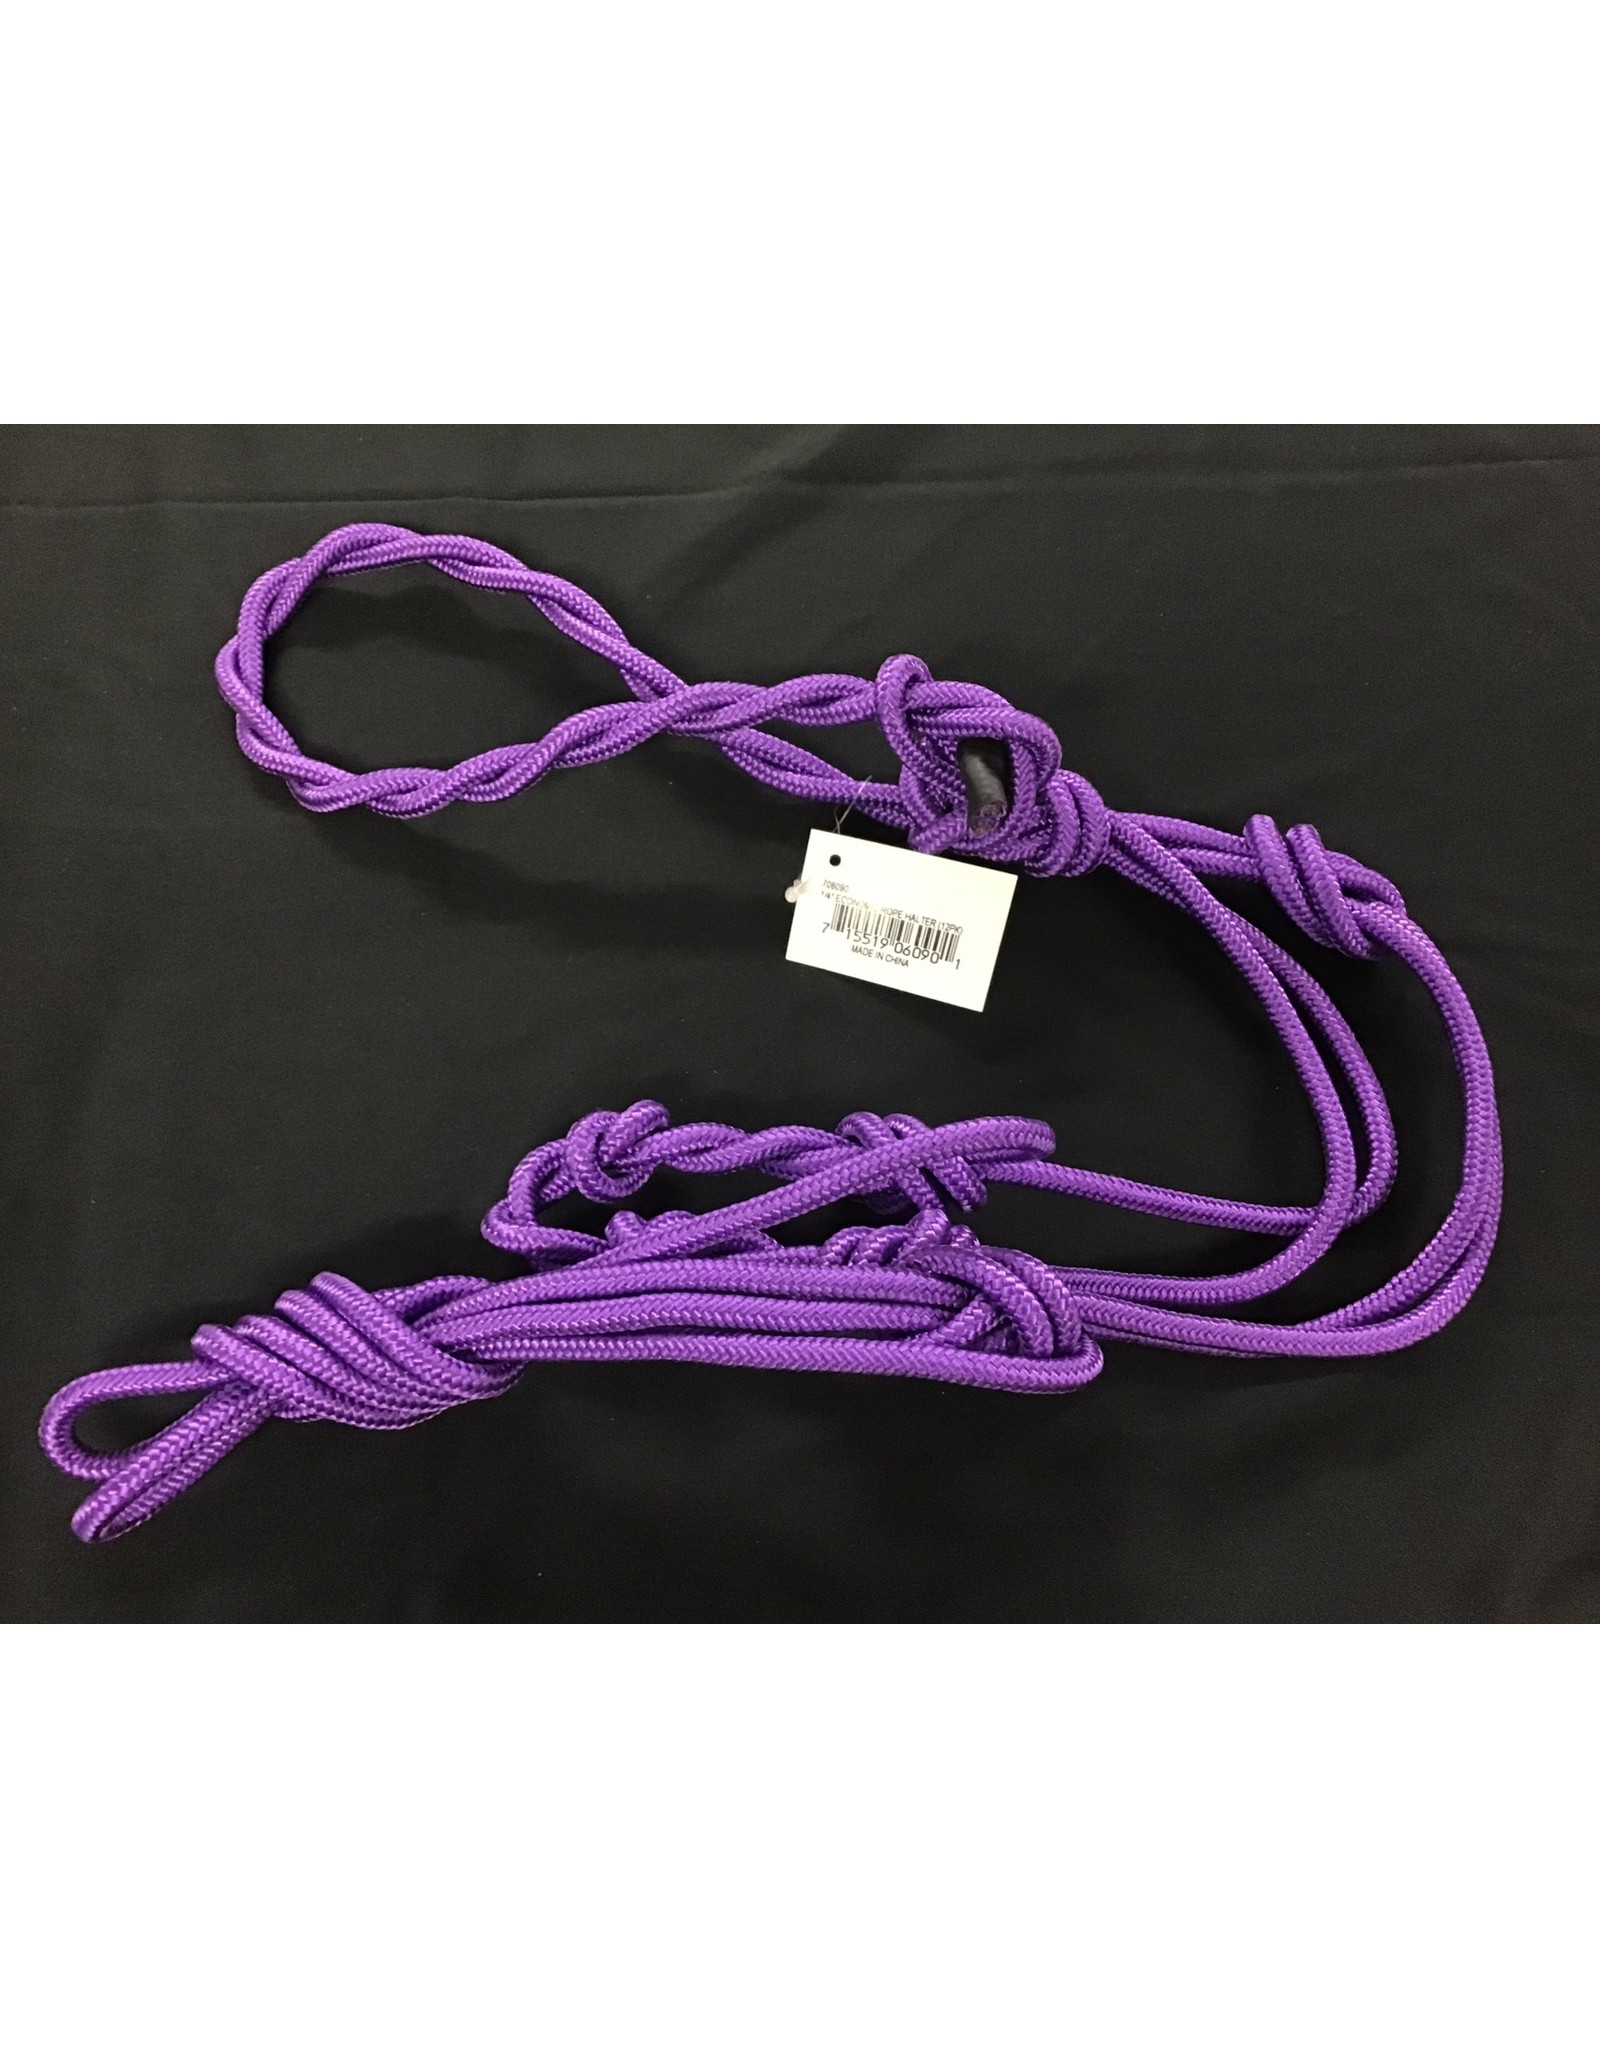 Partrade Thin Rope Halter, Assorted Colors, No Lead